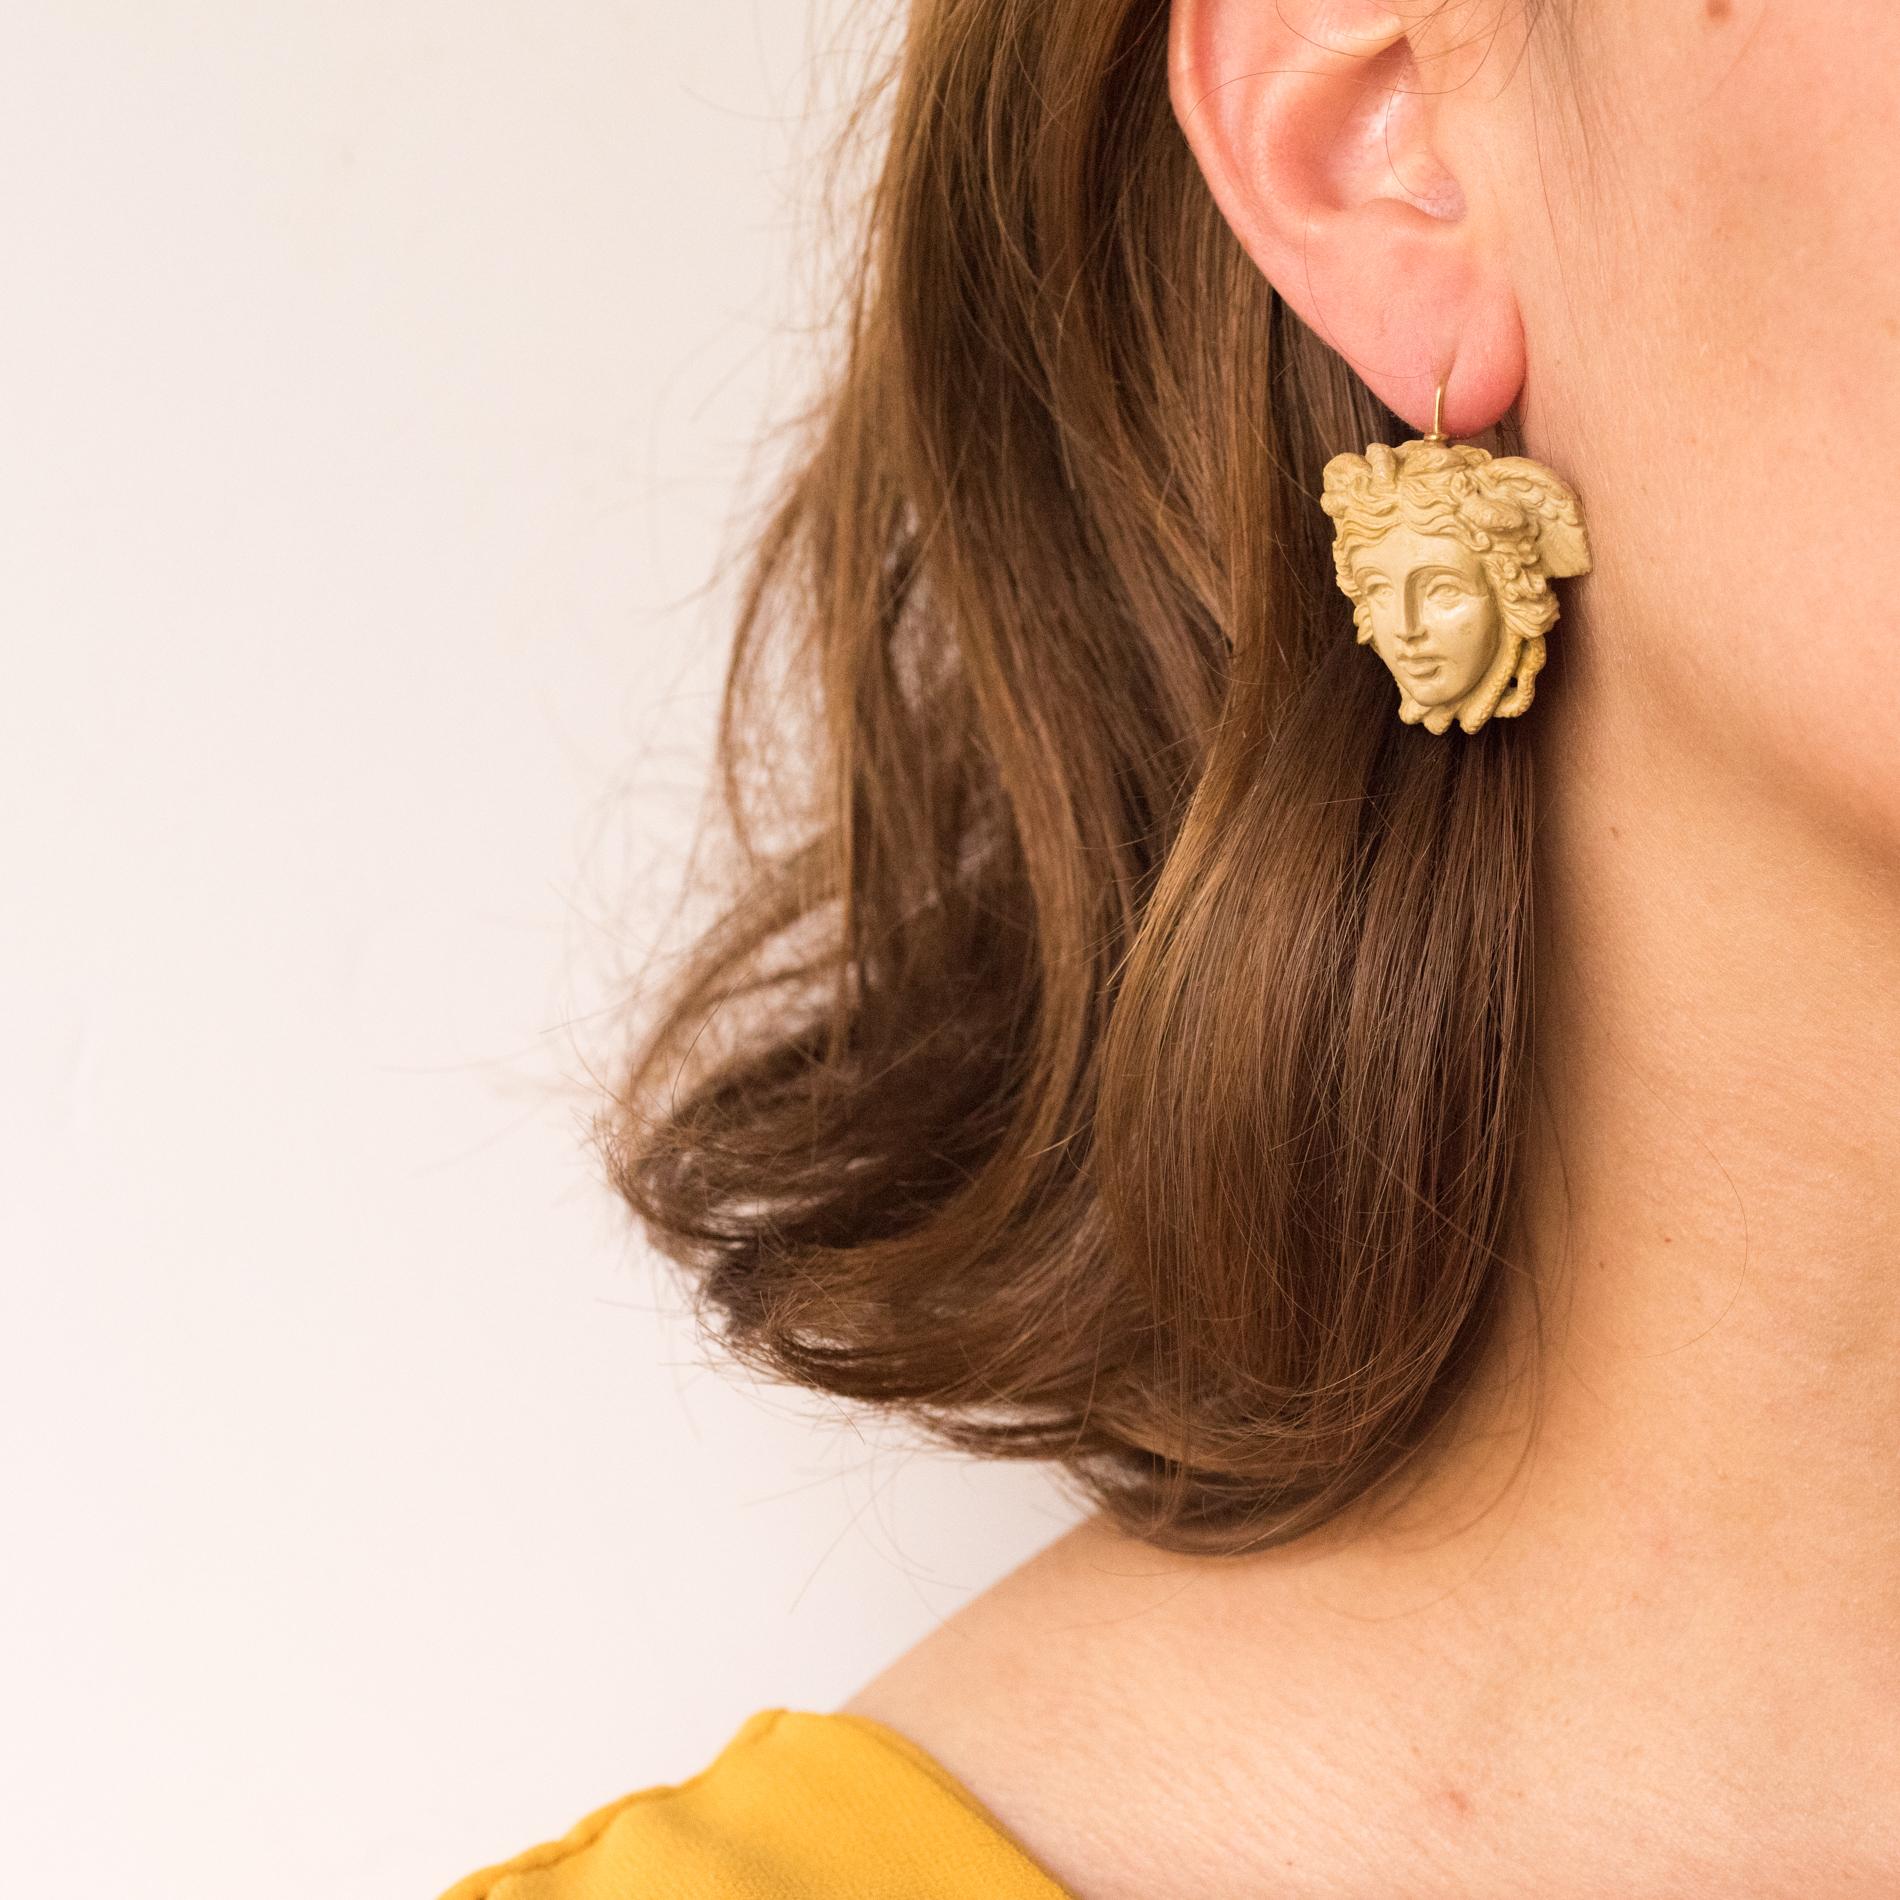 For pierced ears.
Earrings in 14 karats yellow gold.
Important antique earrings, they are made of a lava stone cameo representing Medusa. Made with precision, each cameo is engraved on its front and back, paying tribute to the realism of the